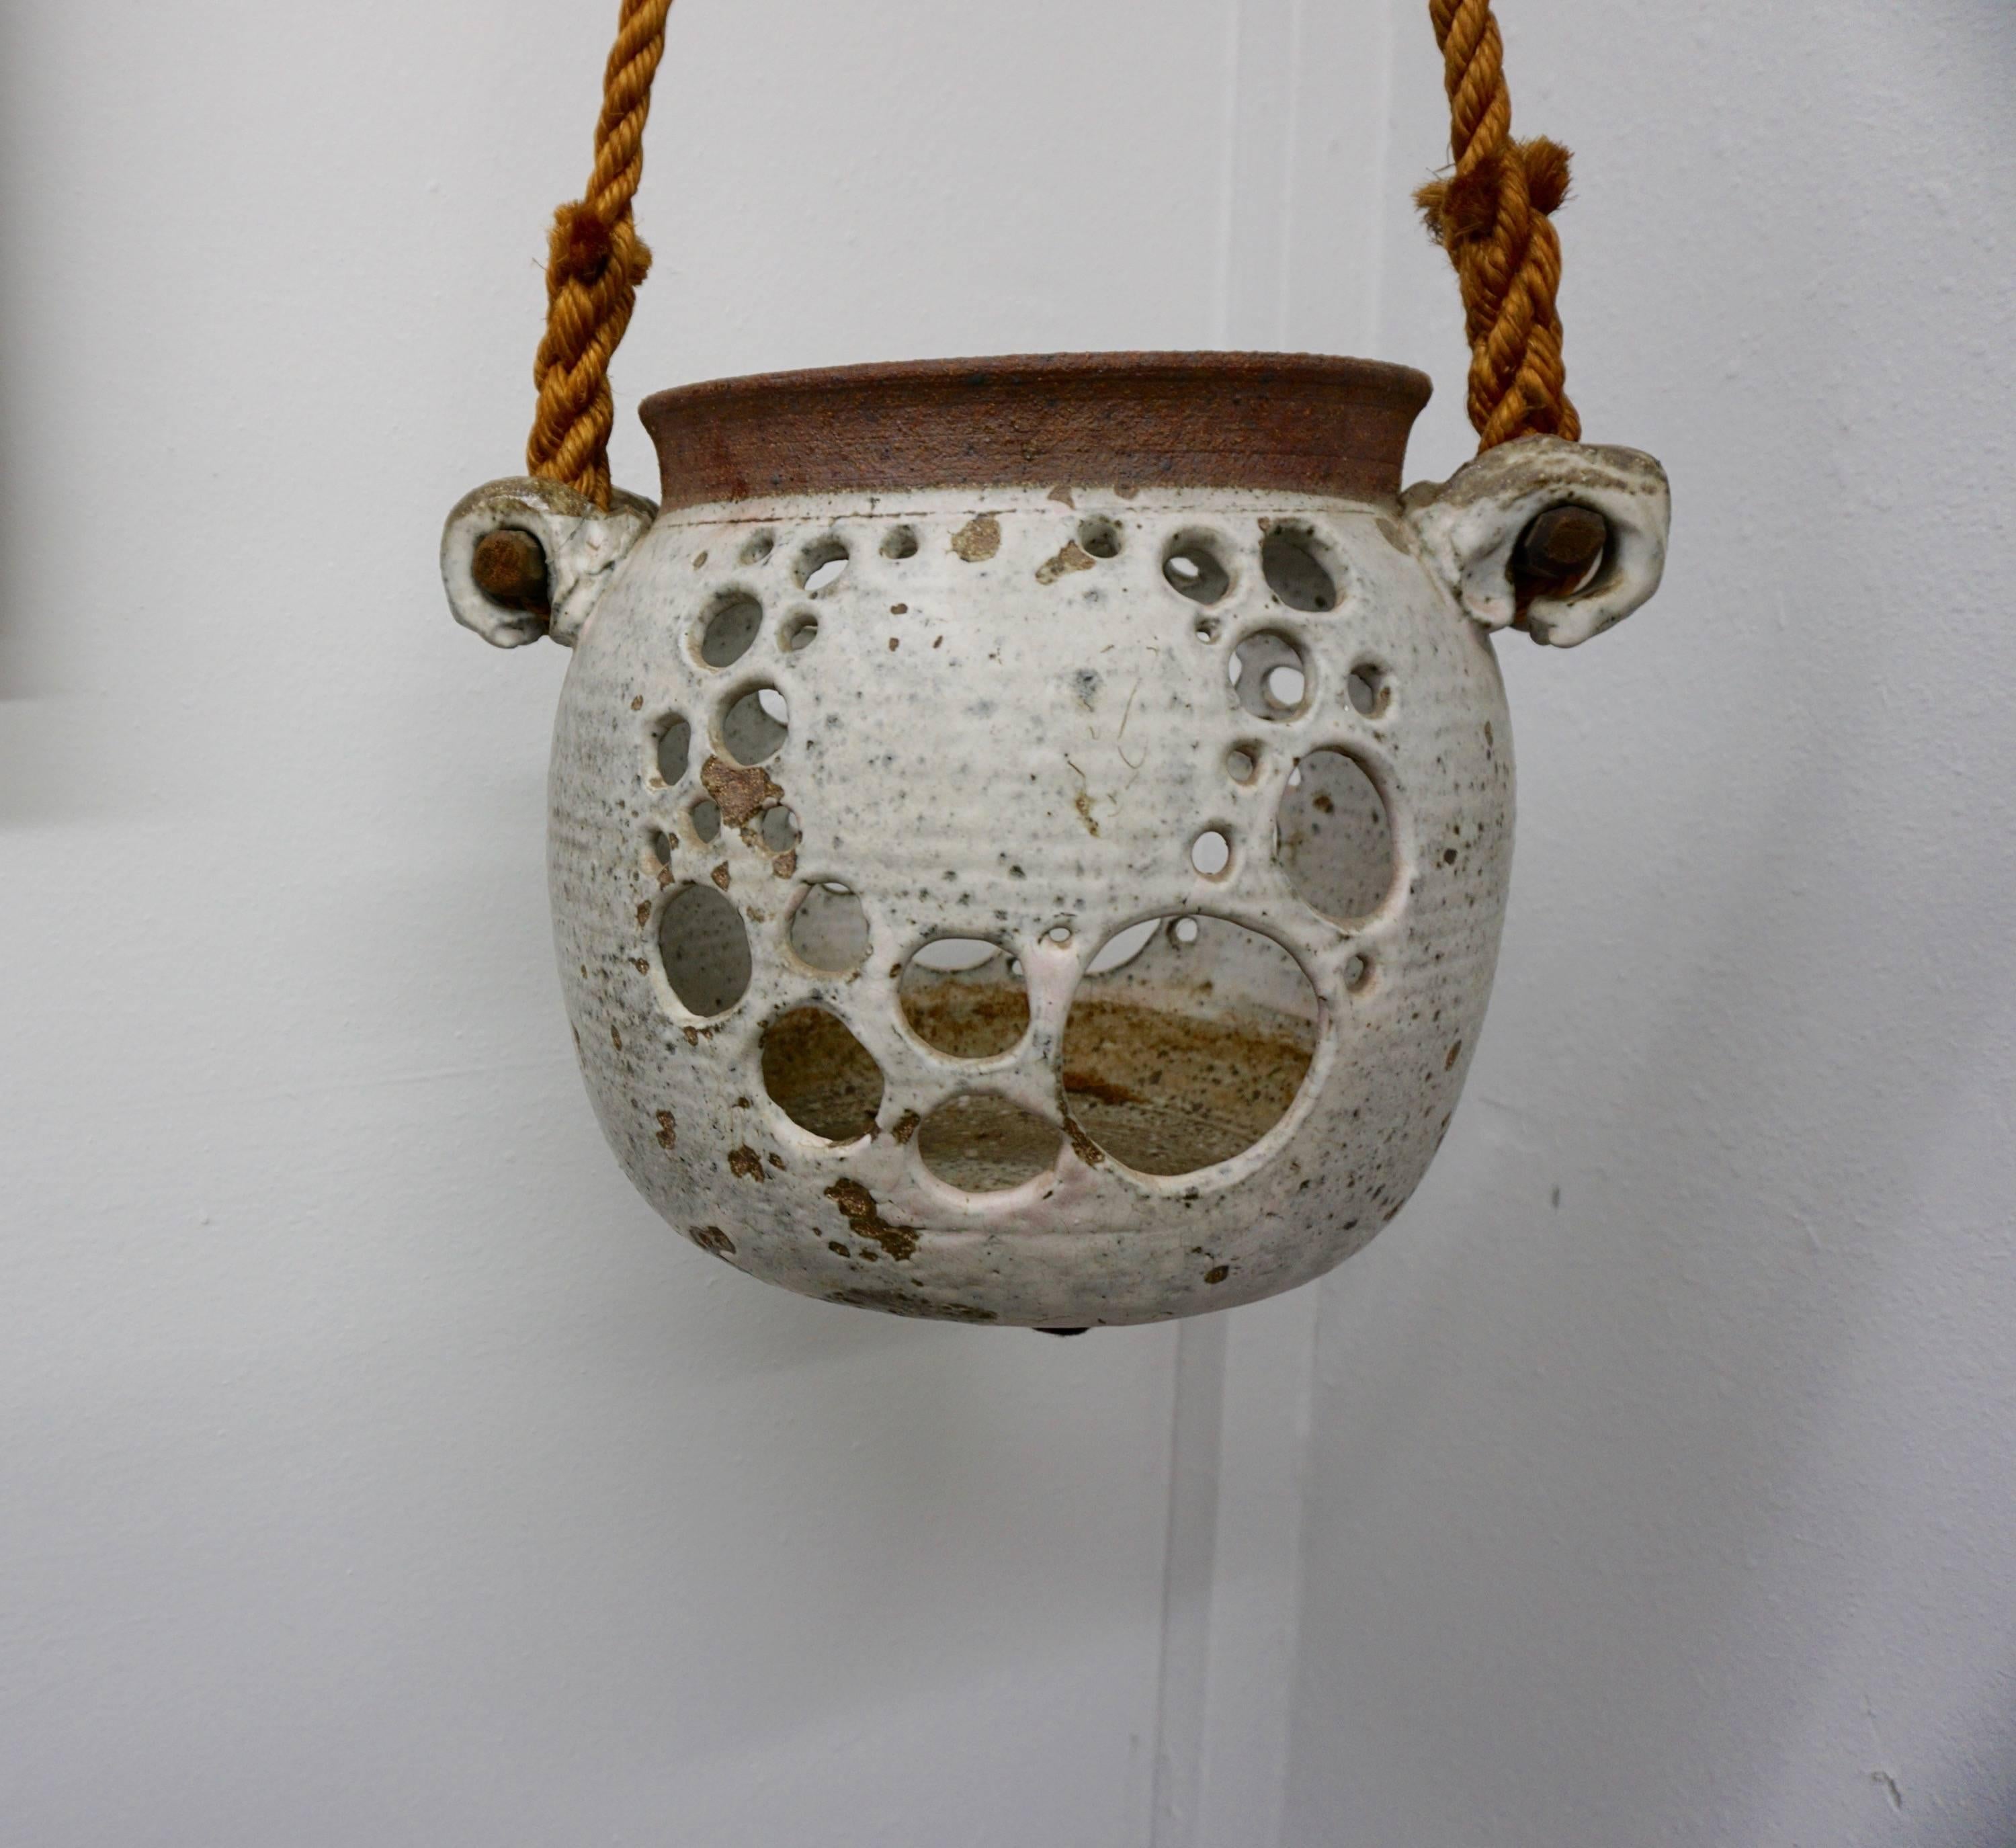 Stoneware vessel with multiple decorative holes hanging from rope attached to wooden rods. Illegibly signed at base.